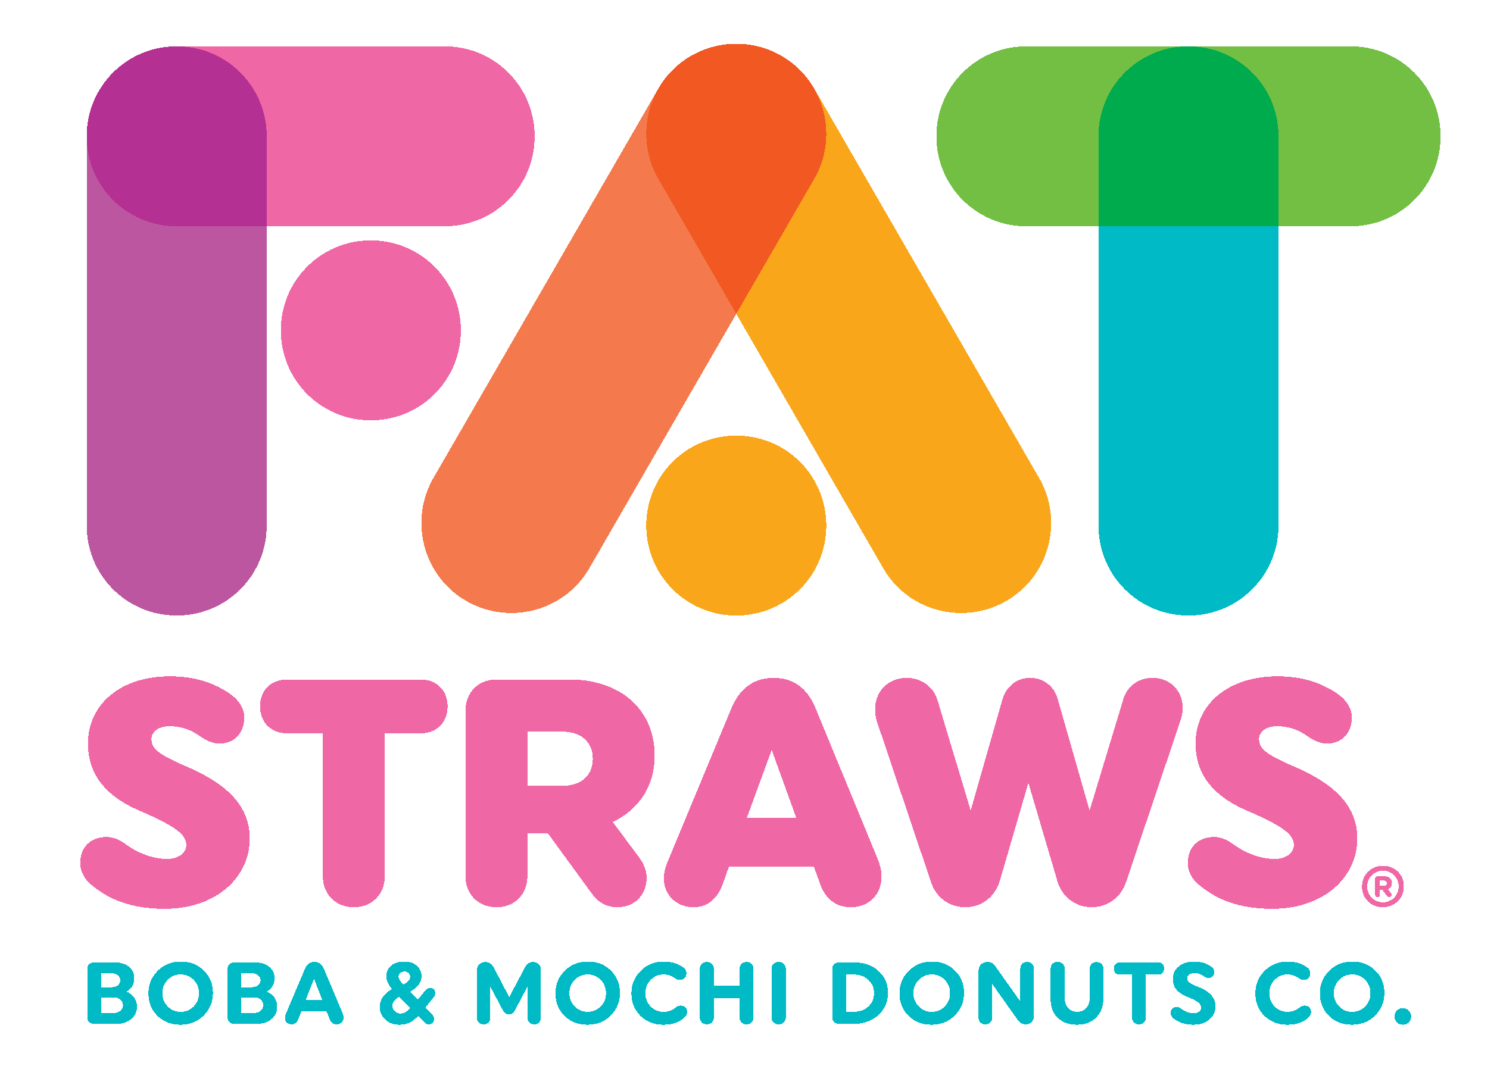 https://fatstraws.com/wp-content/uploads/2023/01/cropped-Fat-Straws_Vert_4C_boba_donuts_updated-01-1.png